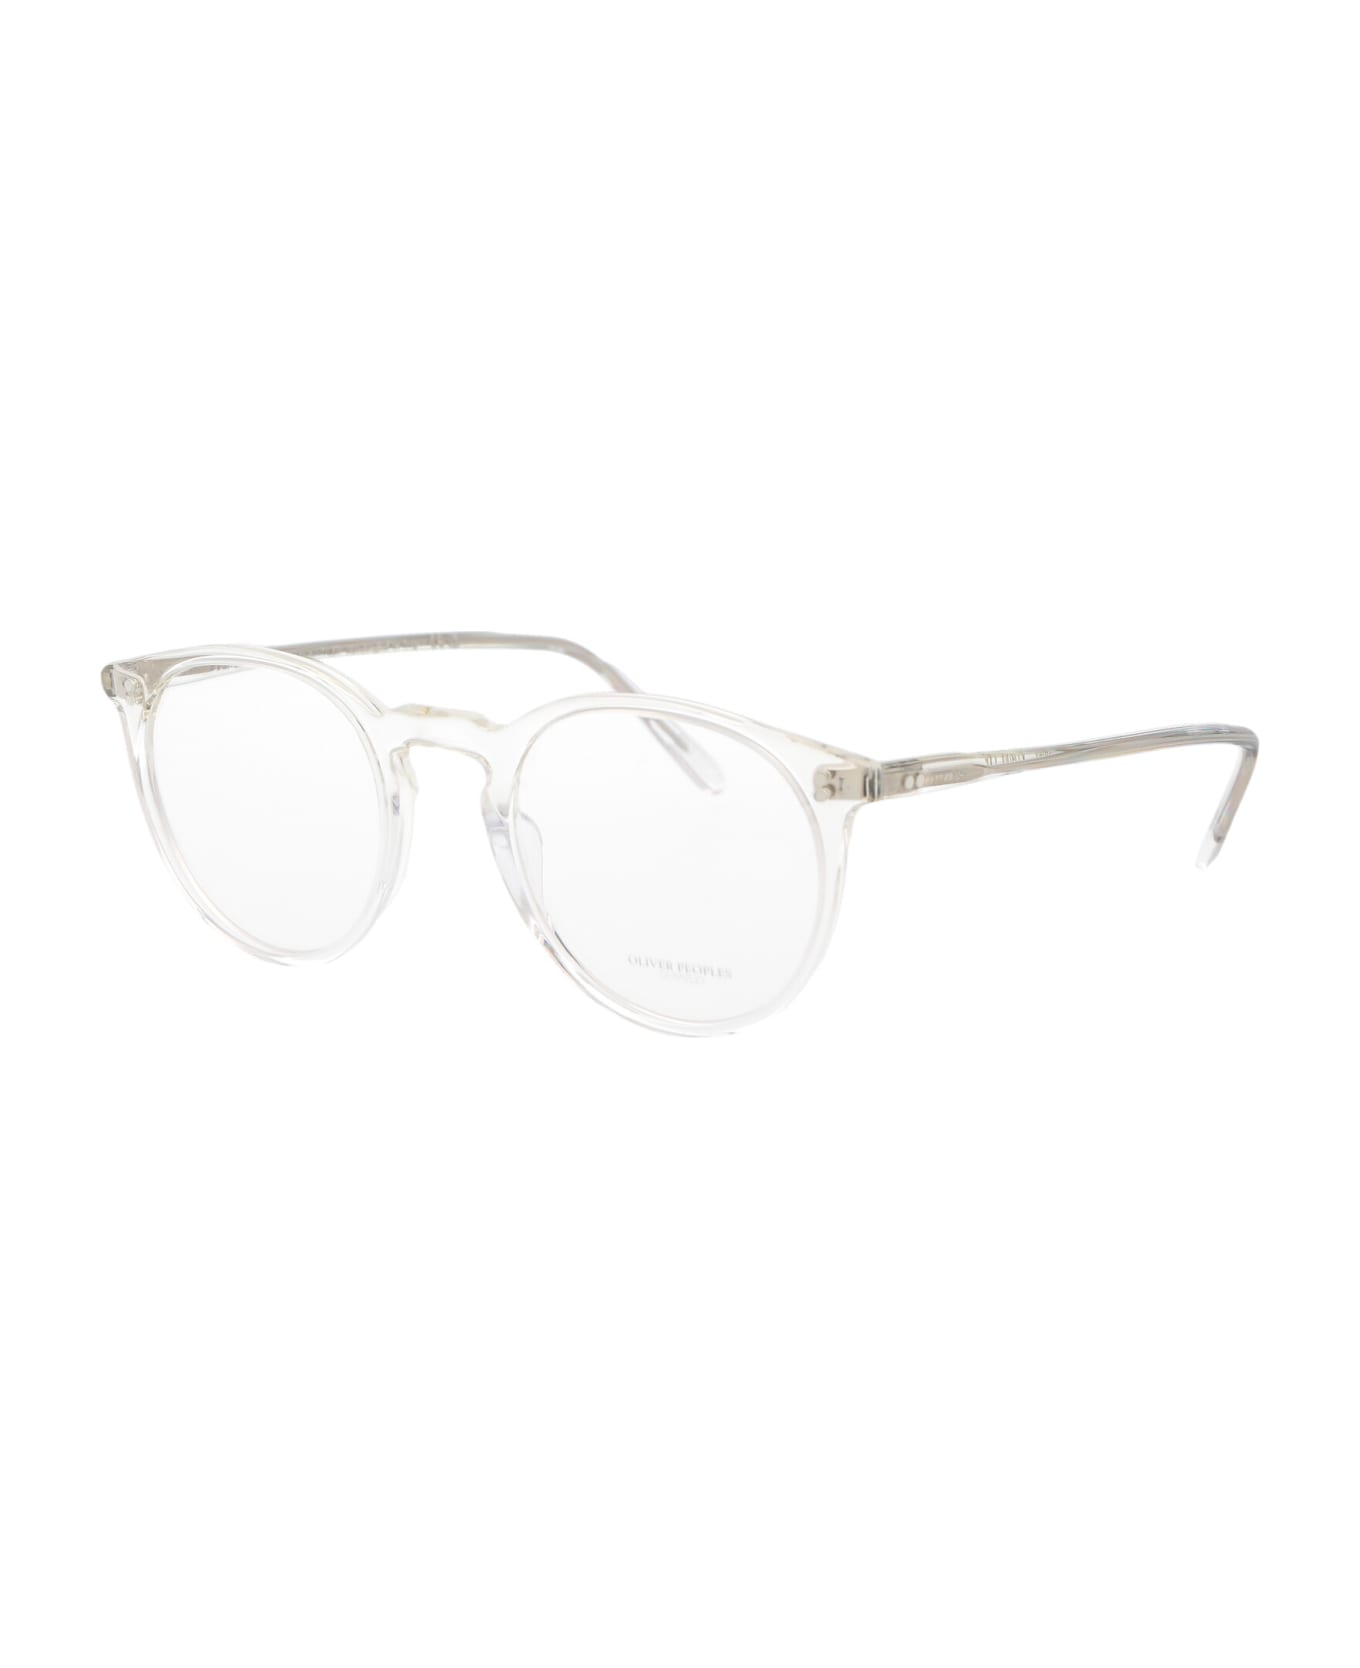 Oliver Peoples O'malley Glasses - 1755 Buff/Crystal Gradient